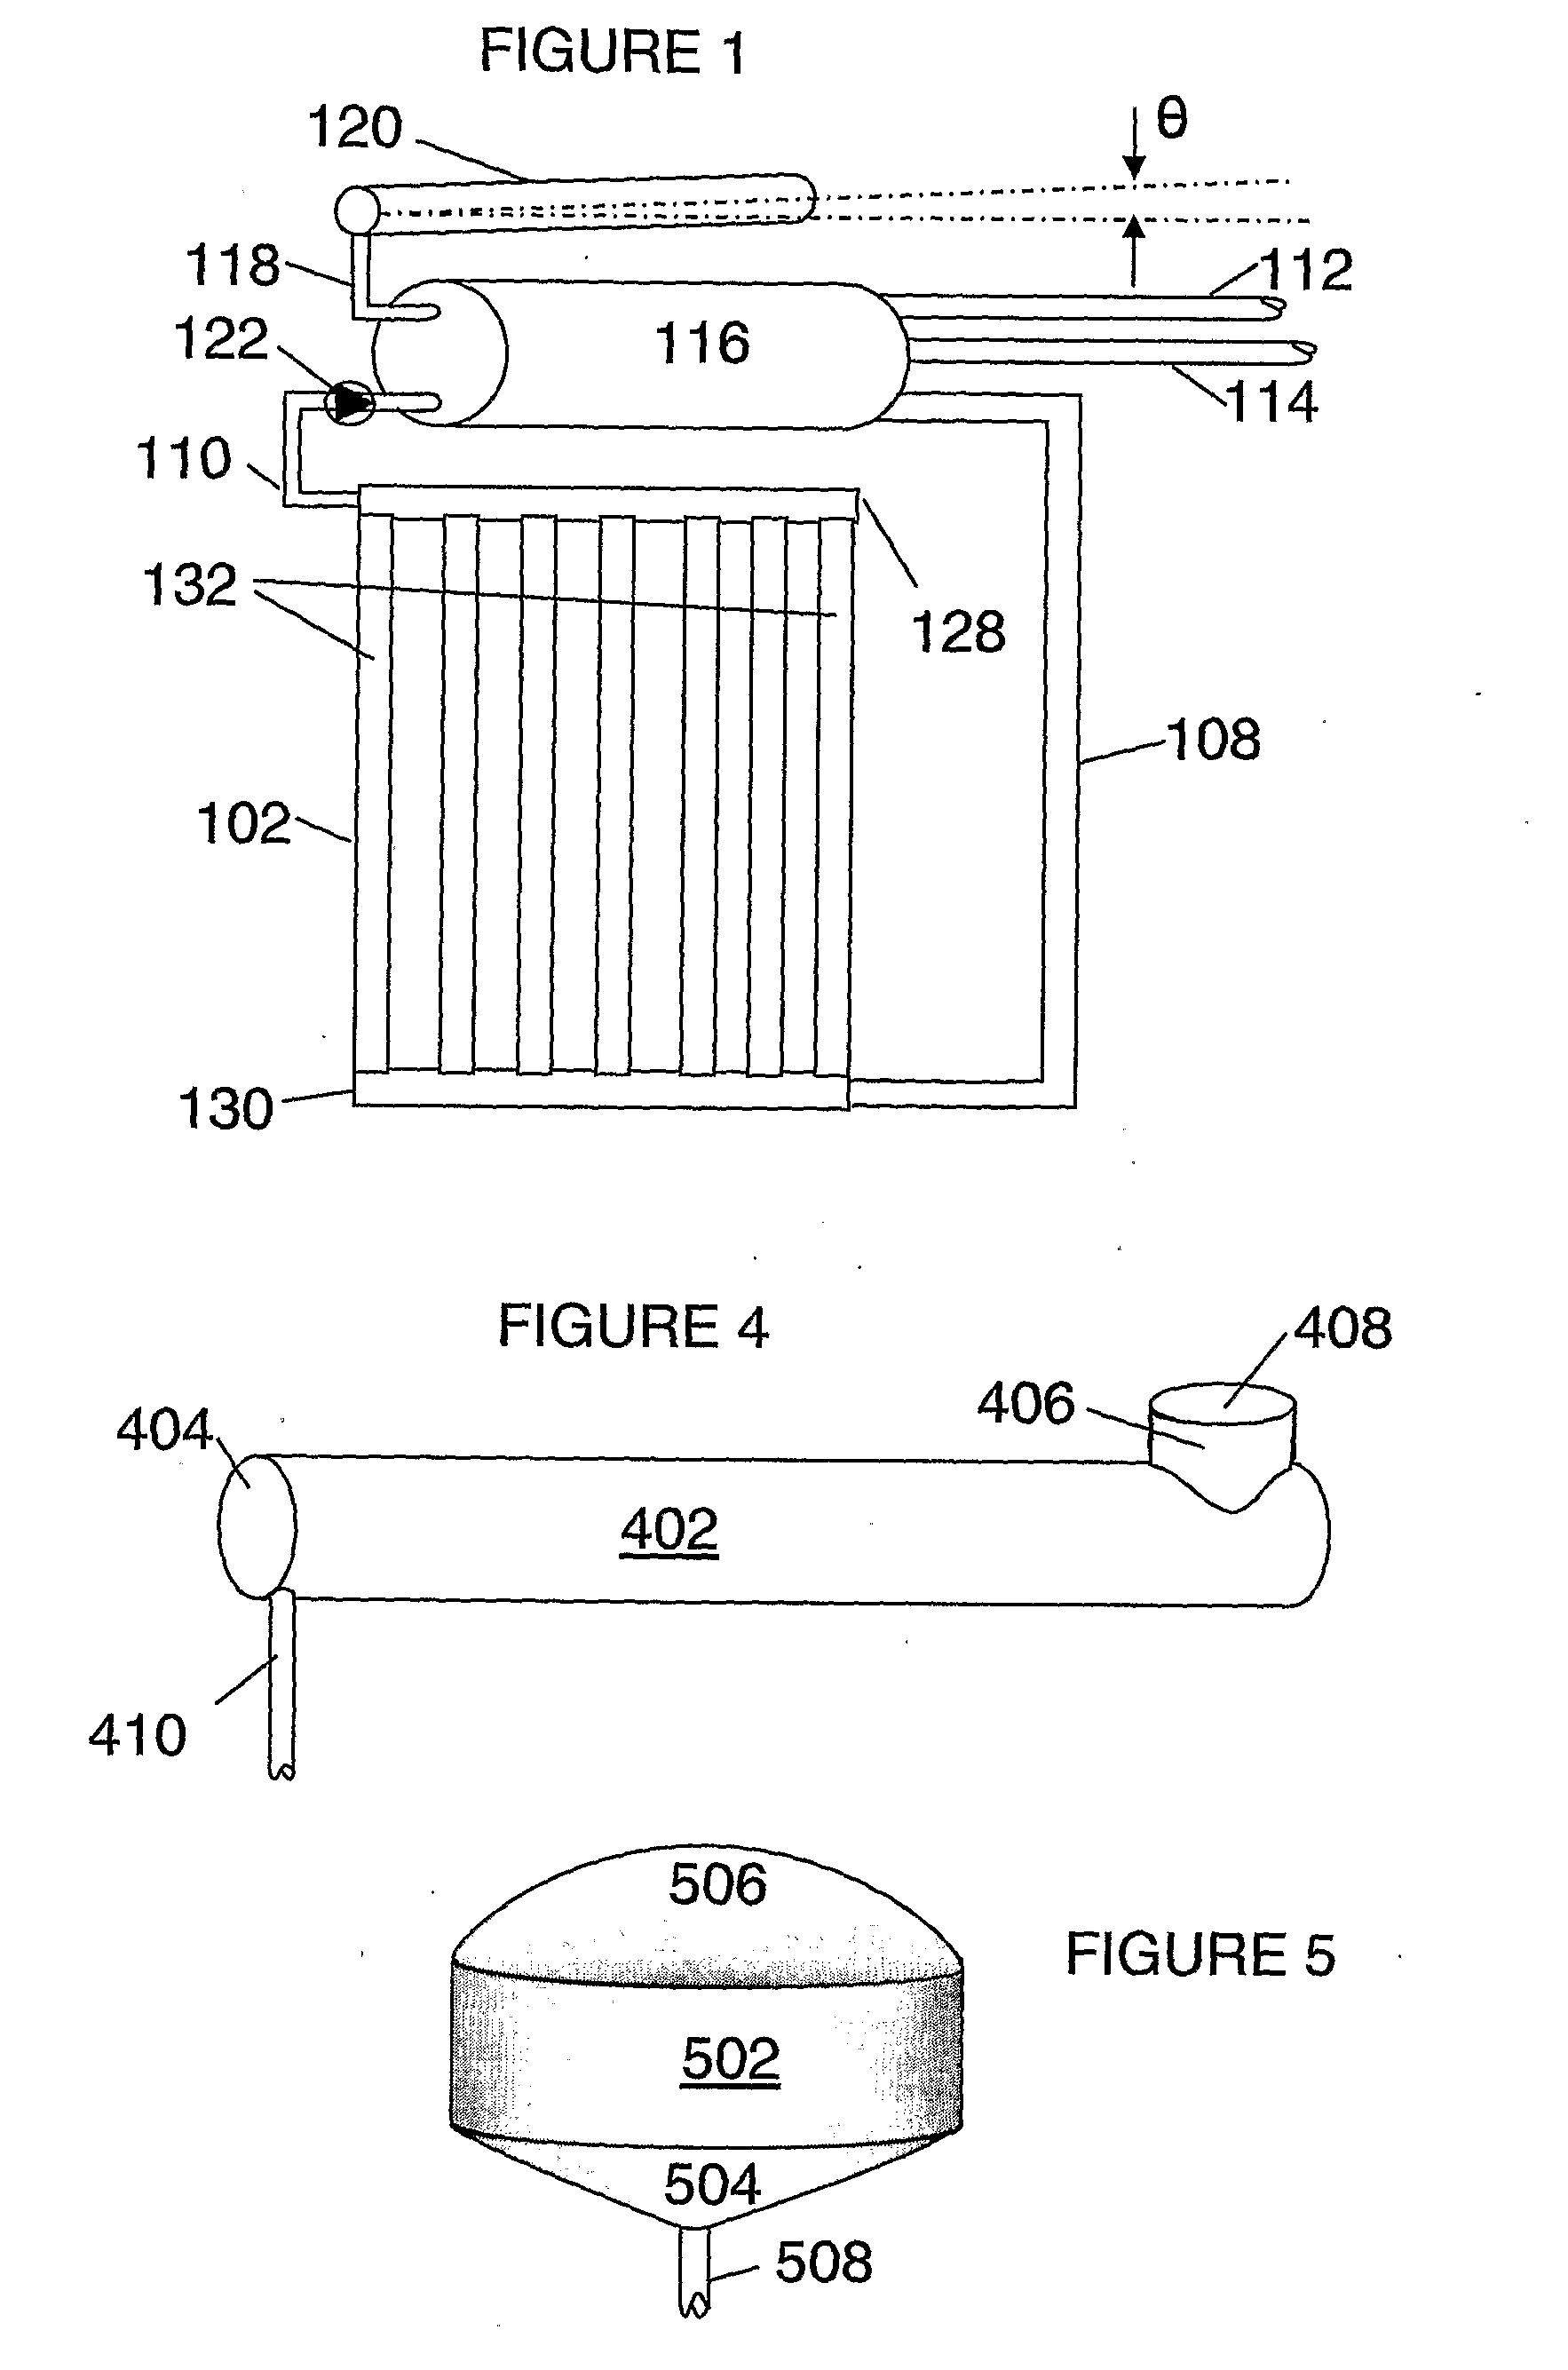 Overtemperature protection system for a solar water heating system